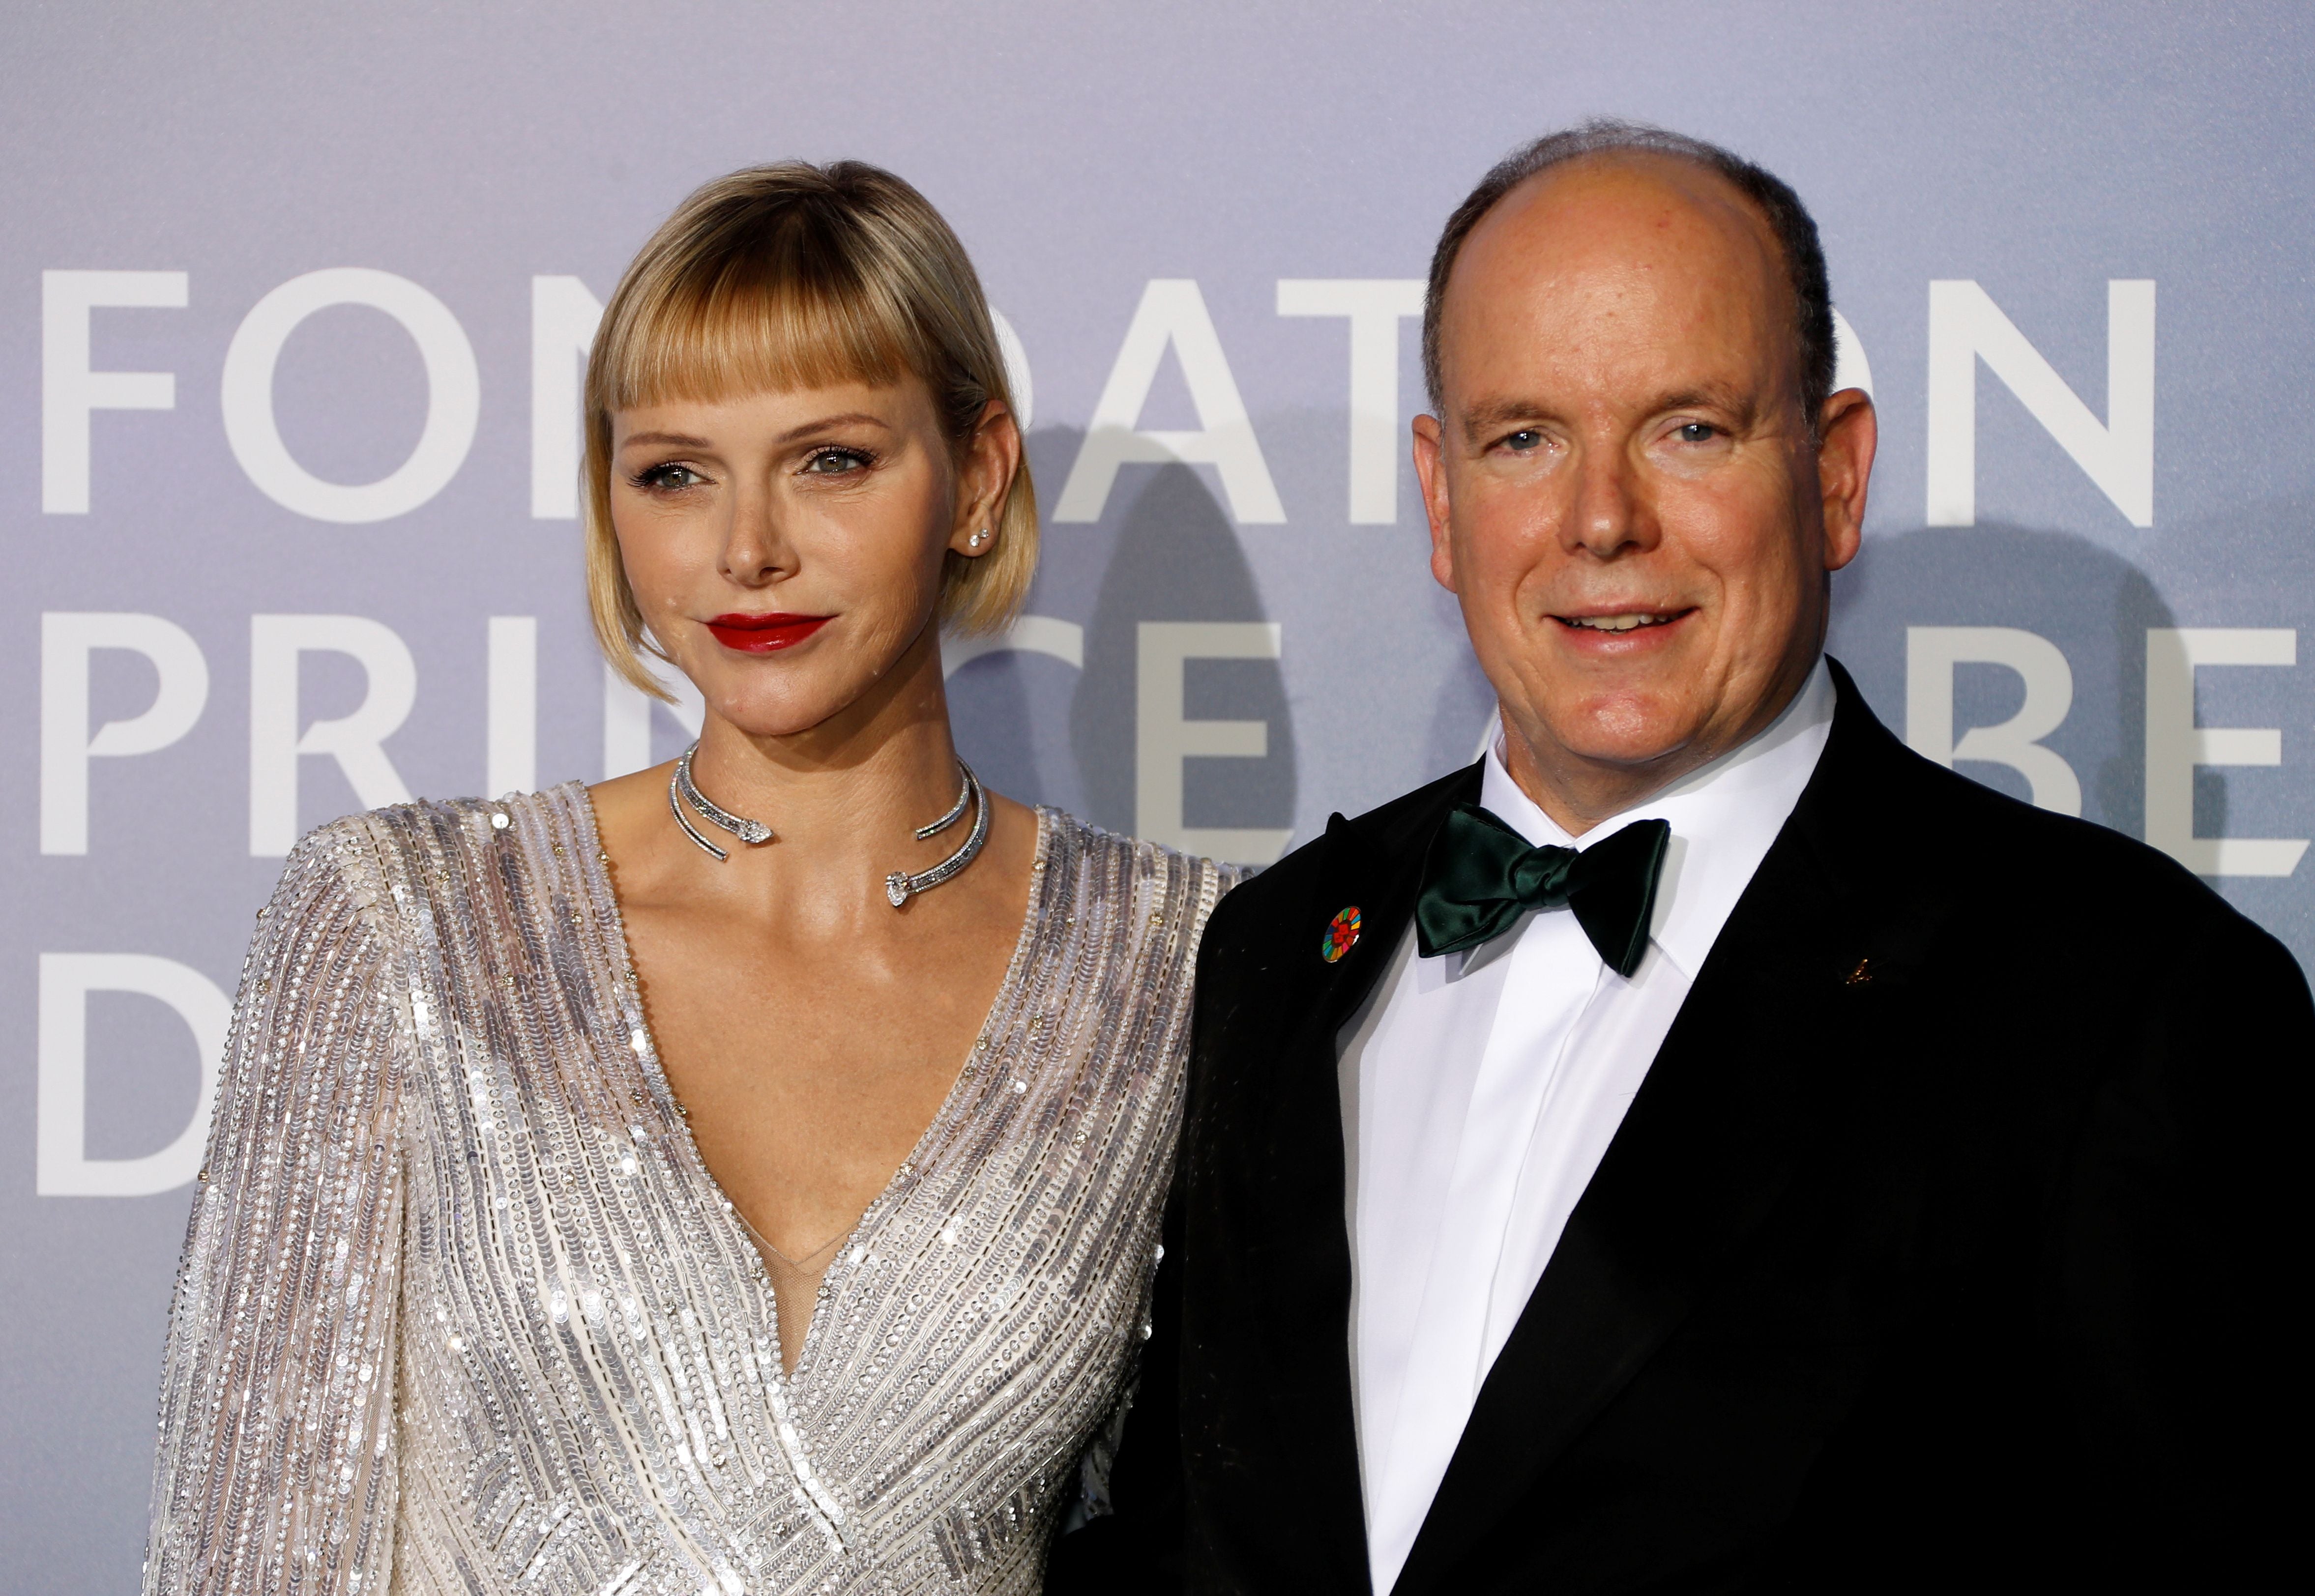 Princess Charlene wore her hair in a bob with blunt bangs in September